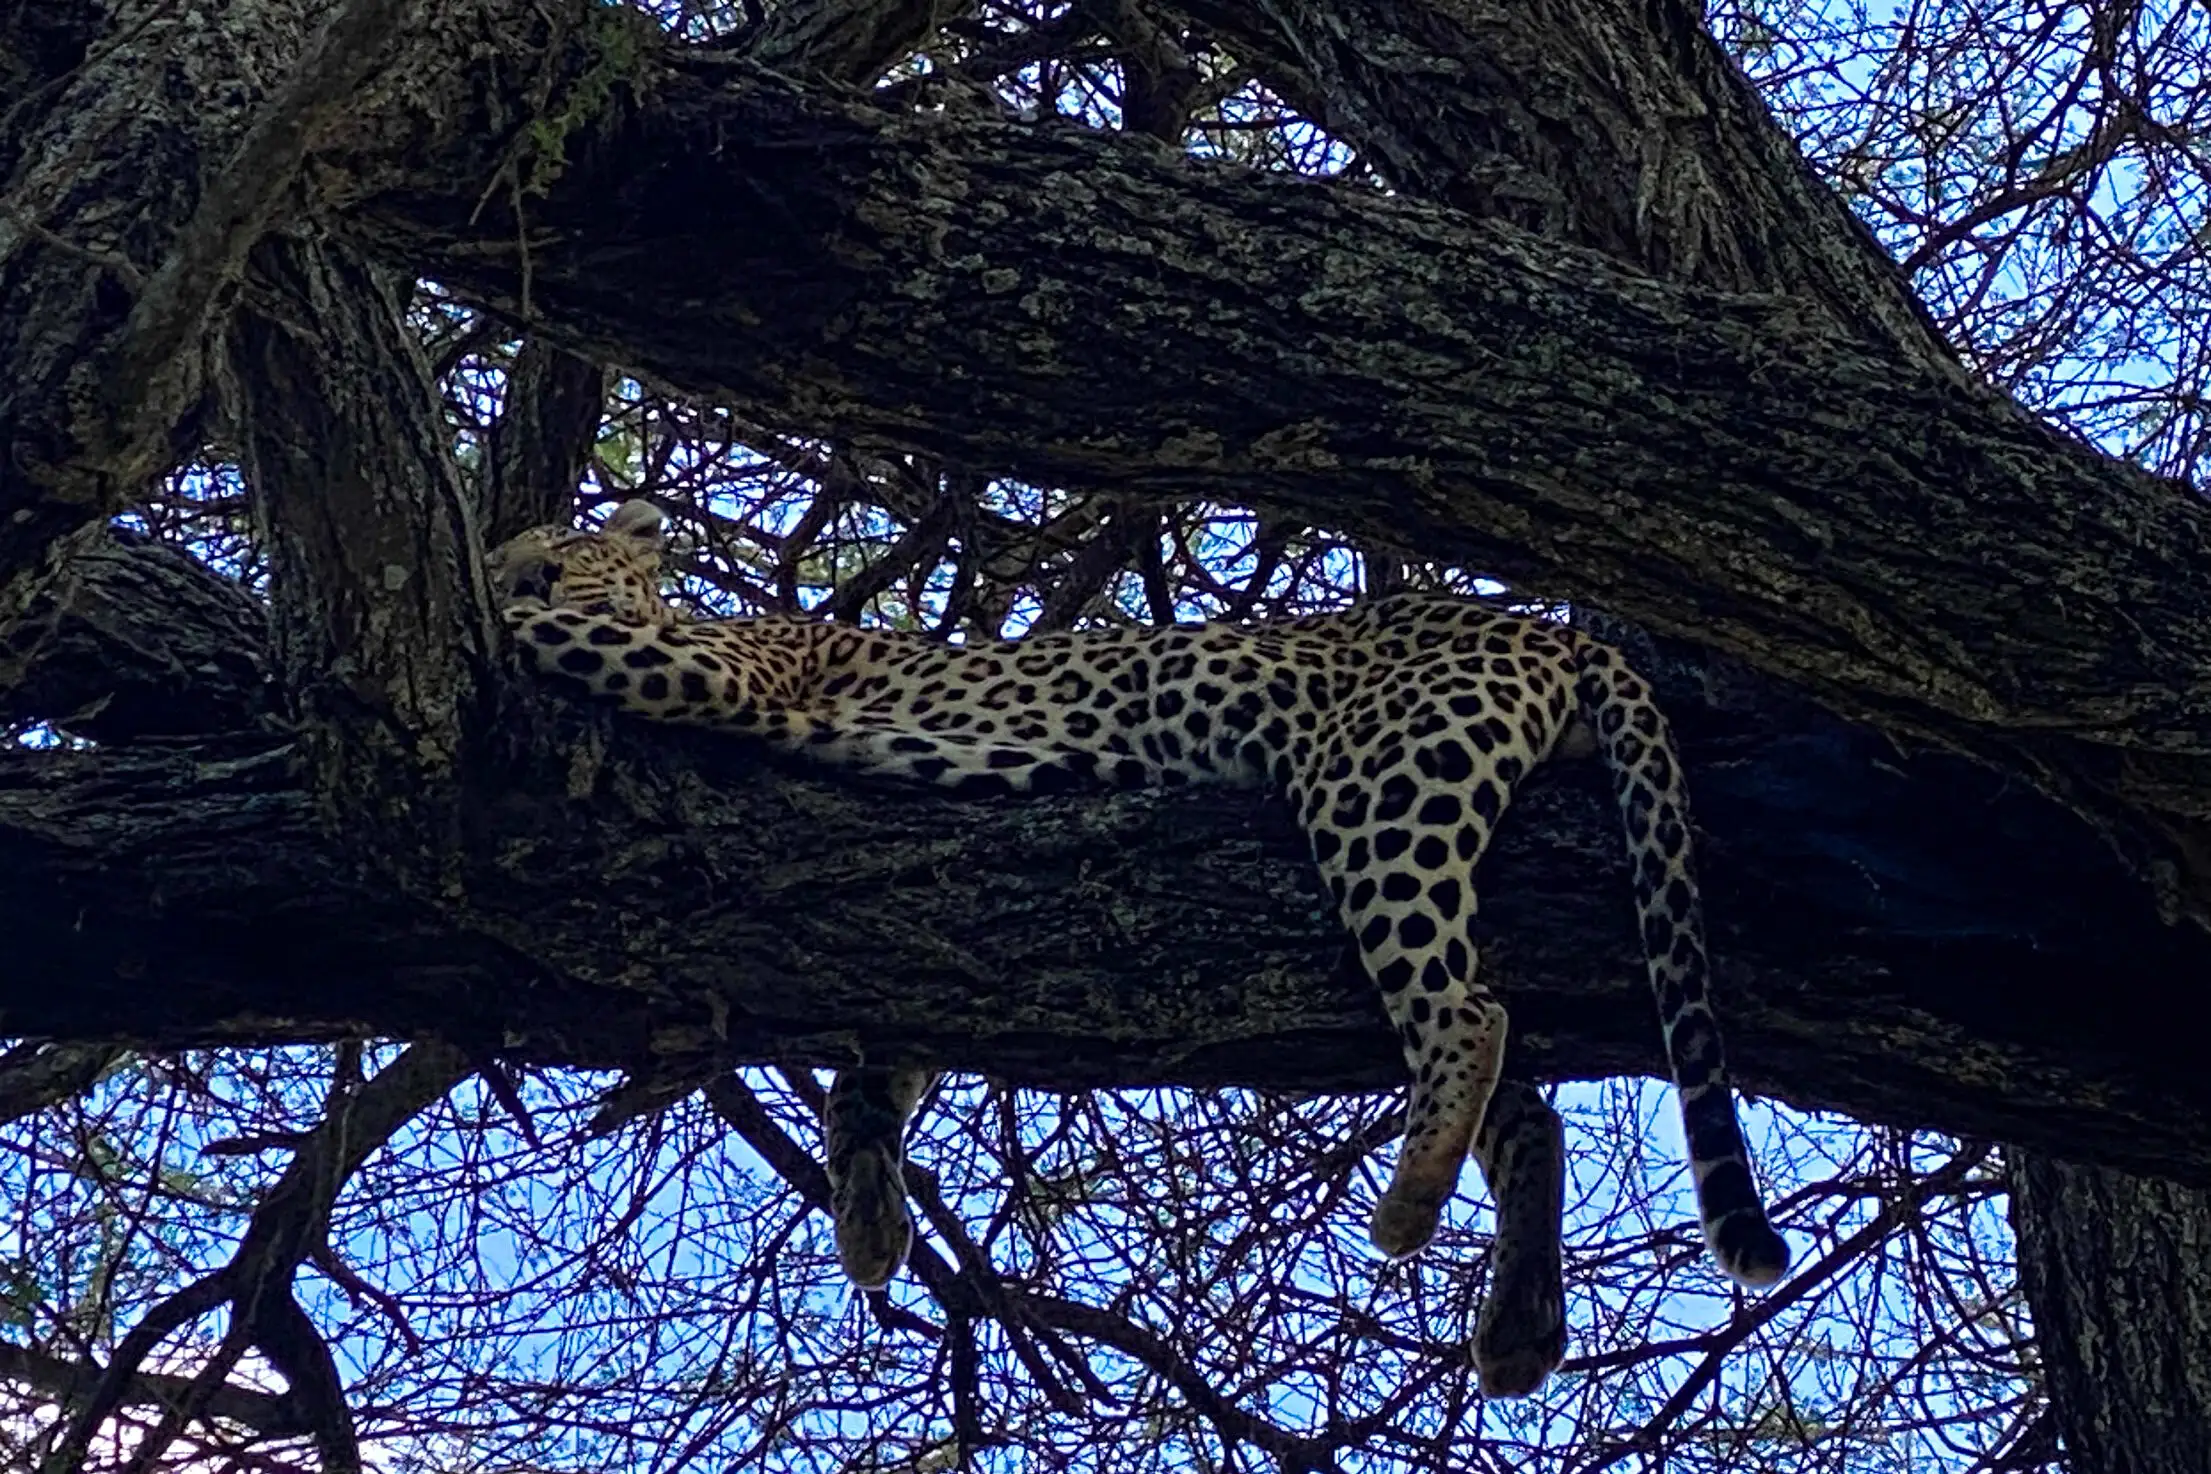 Leopard resting in a tree on a clear day